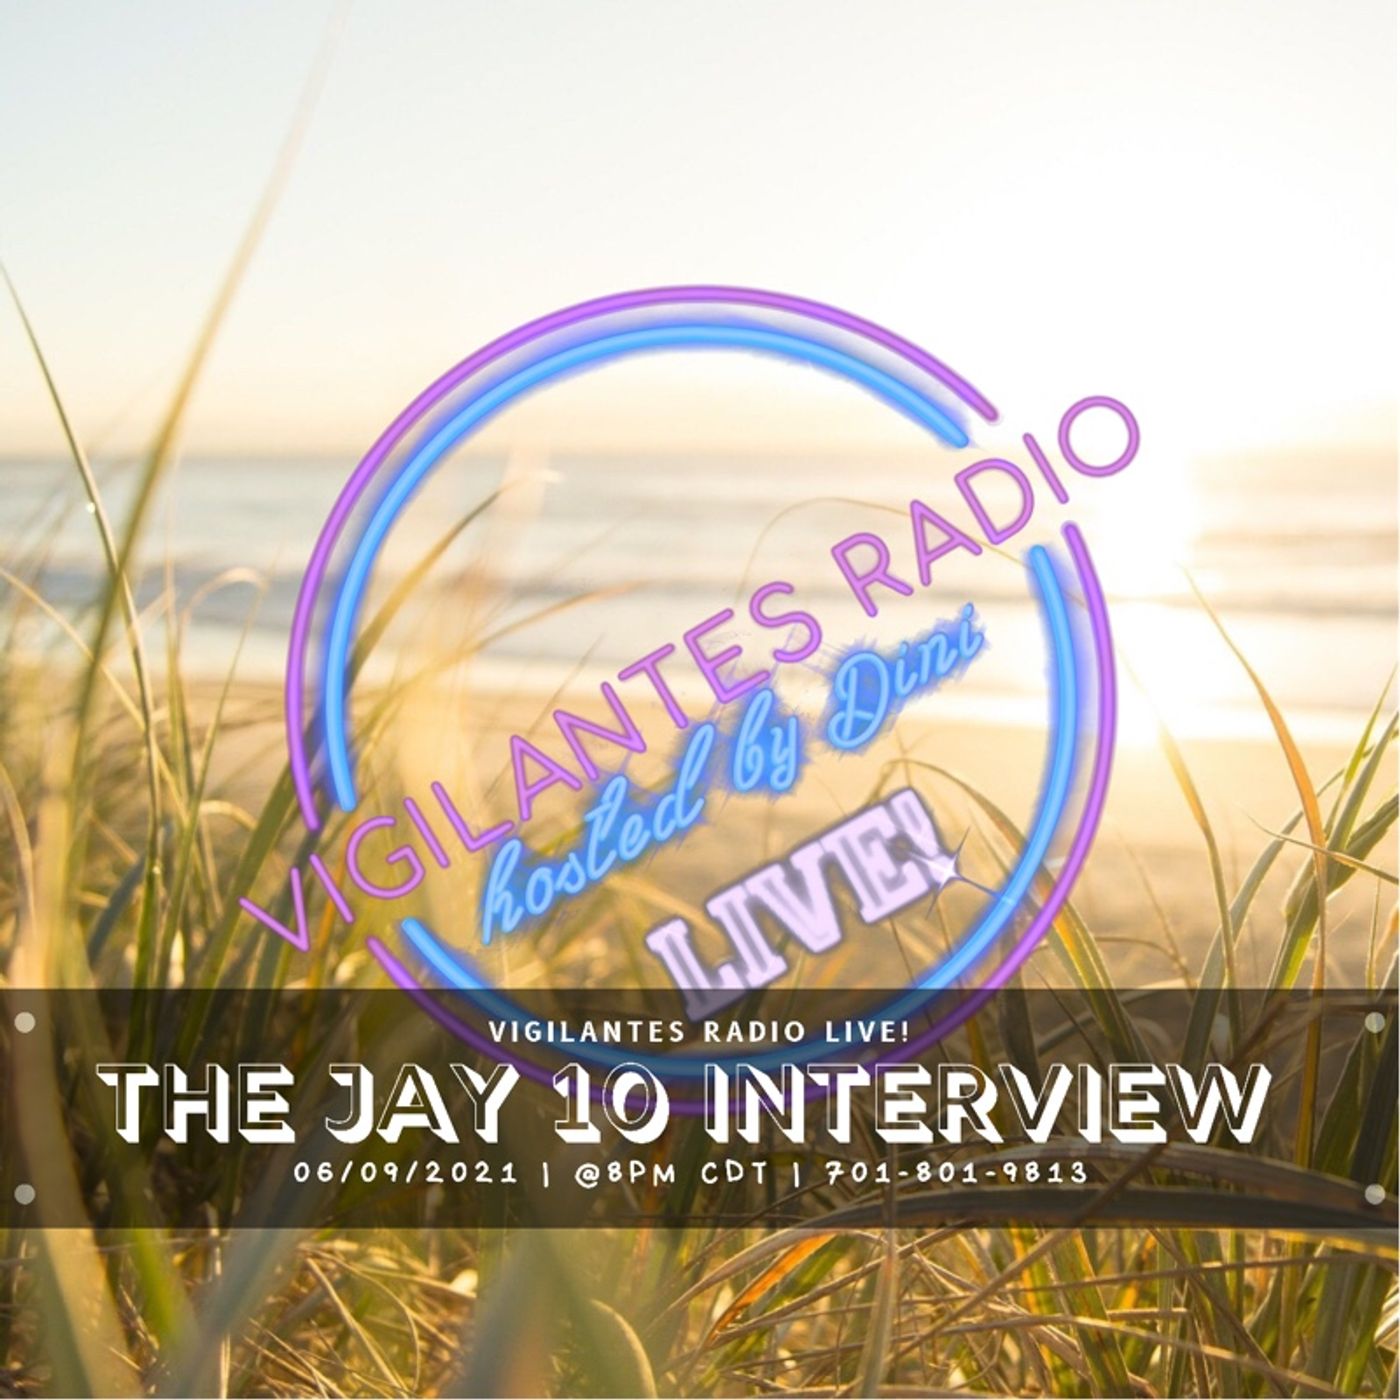 The Jay 10 Interview. Image